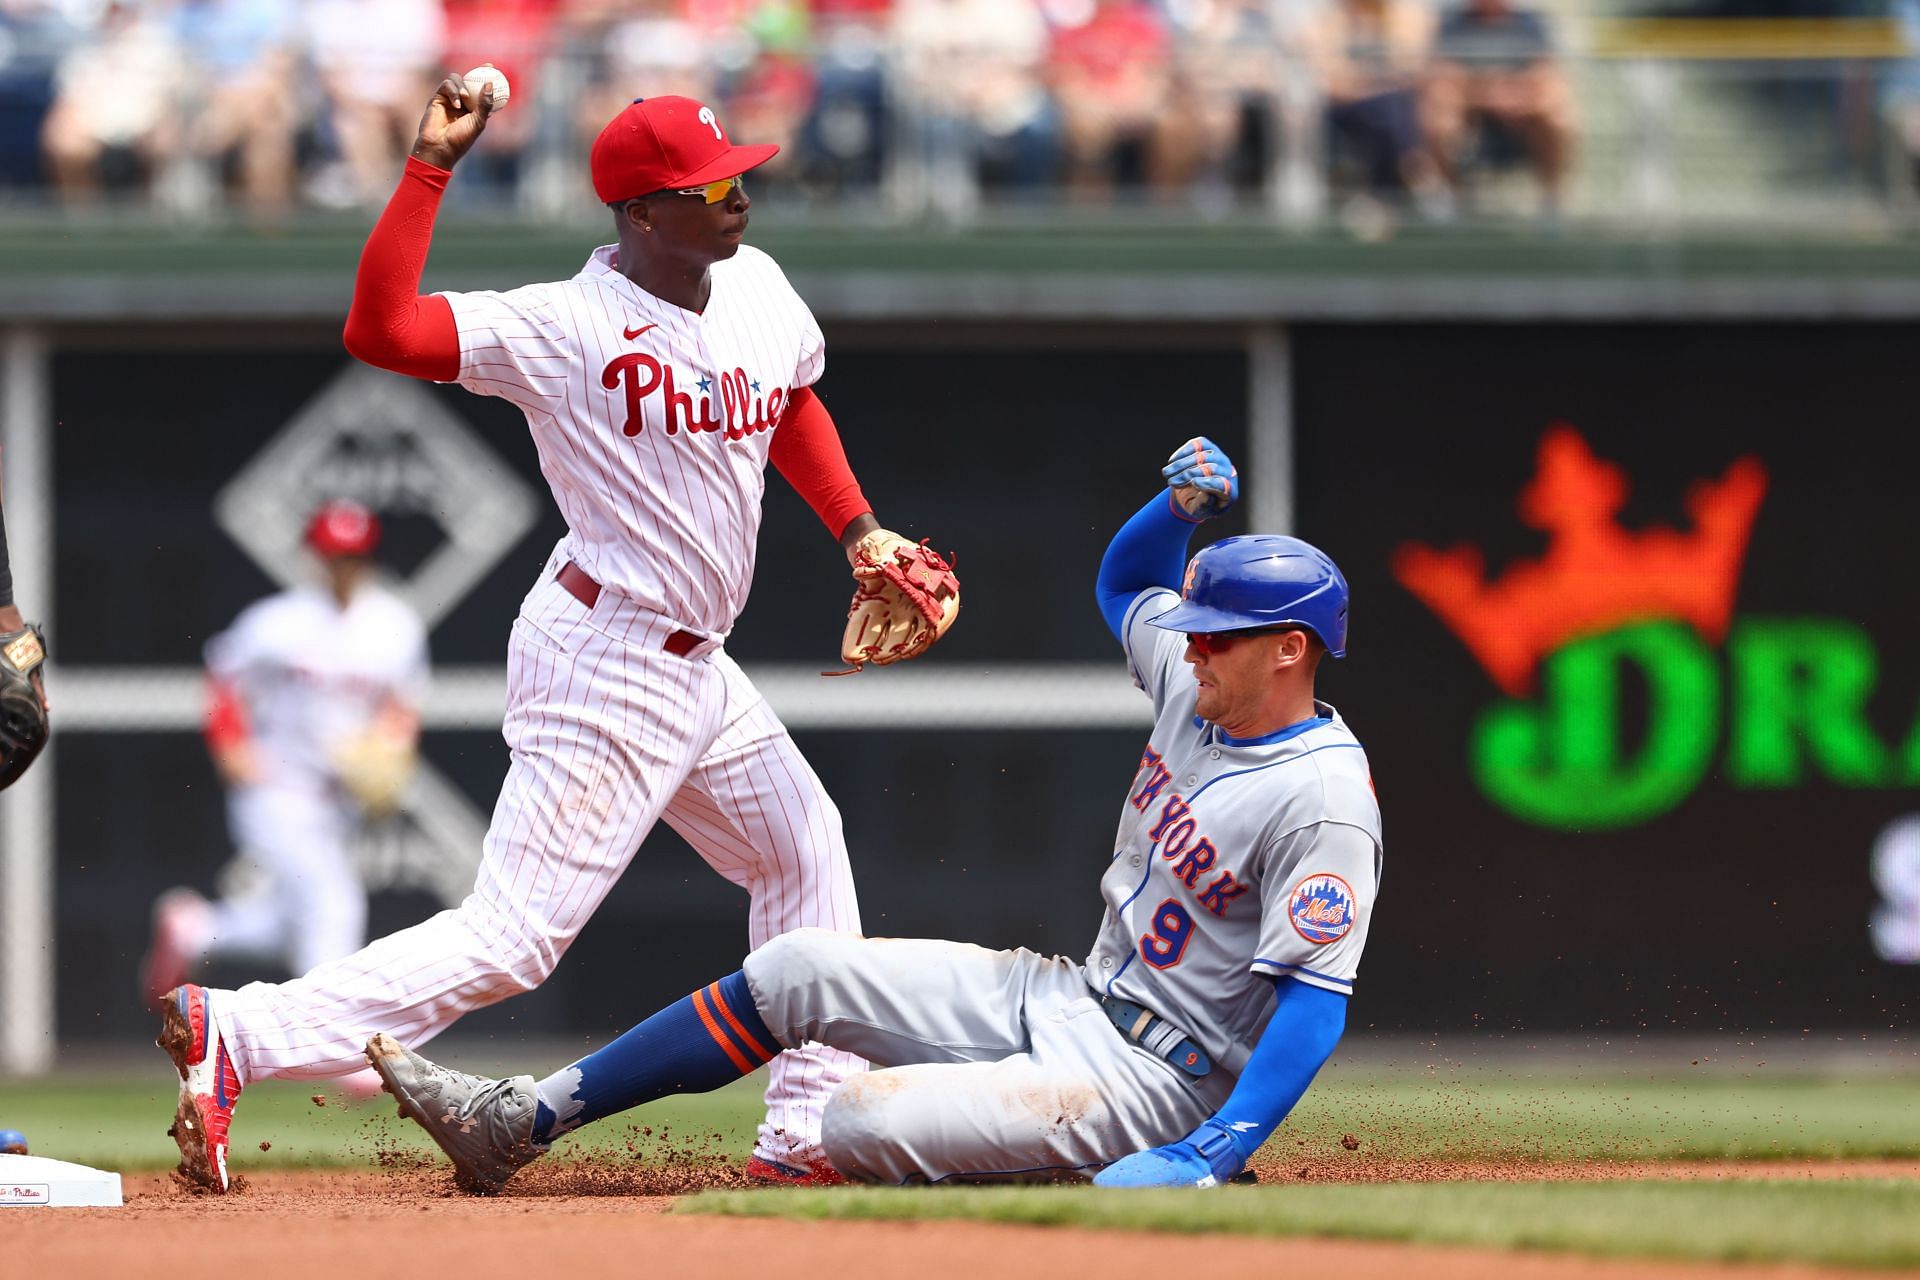 The New York Mets and Philadelphia Phillies will clash for the second time this season